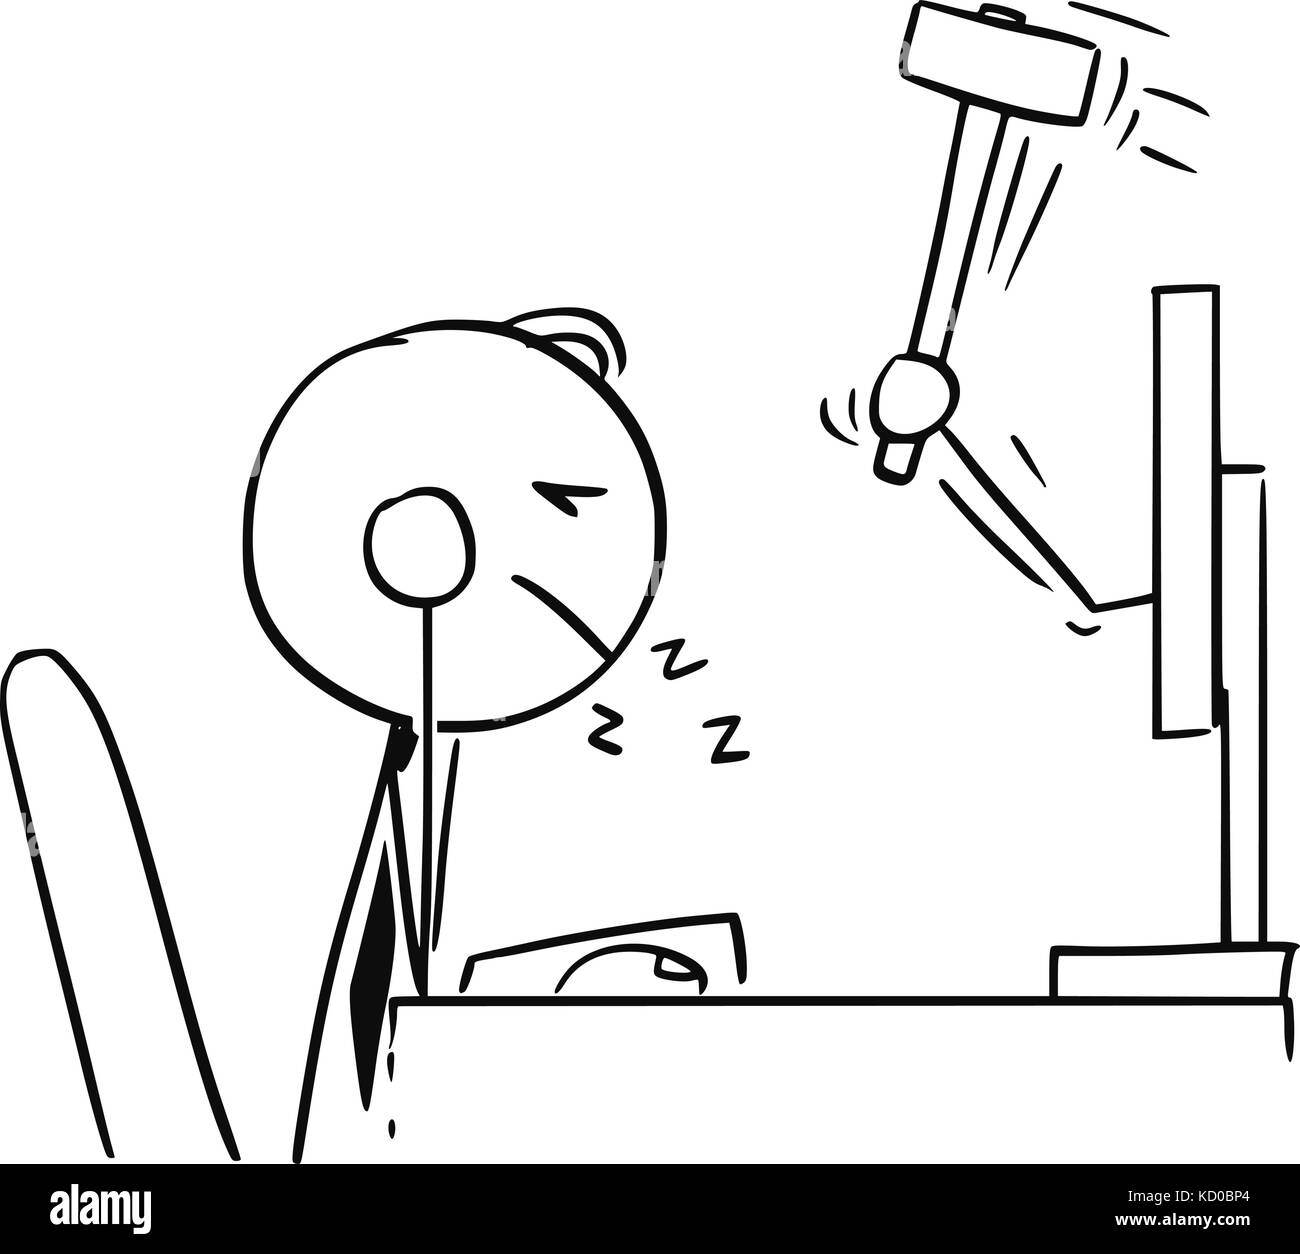 Cartoon stick man illustration of tired sleeping businessman or clerk working on computer and wake up from computer conceptual concept. Stock Vector